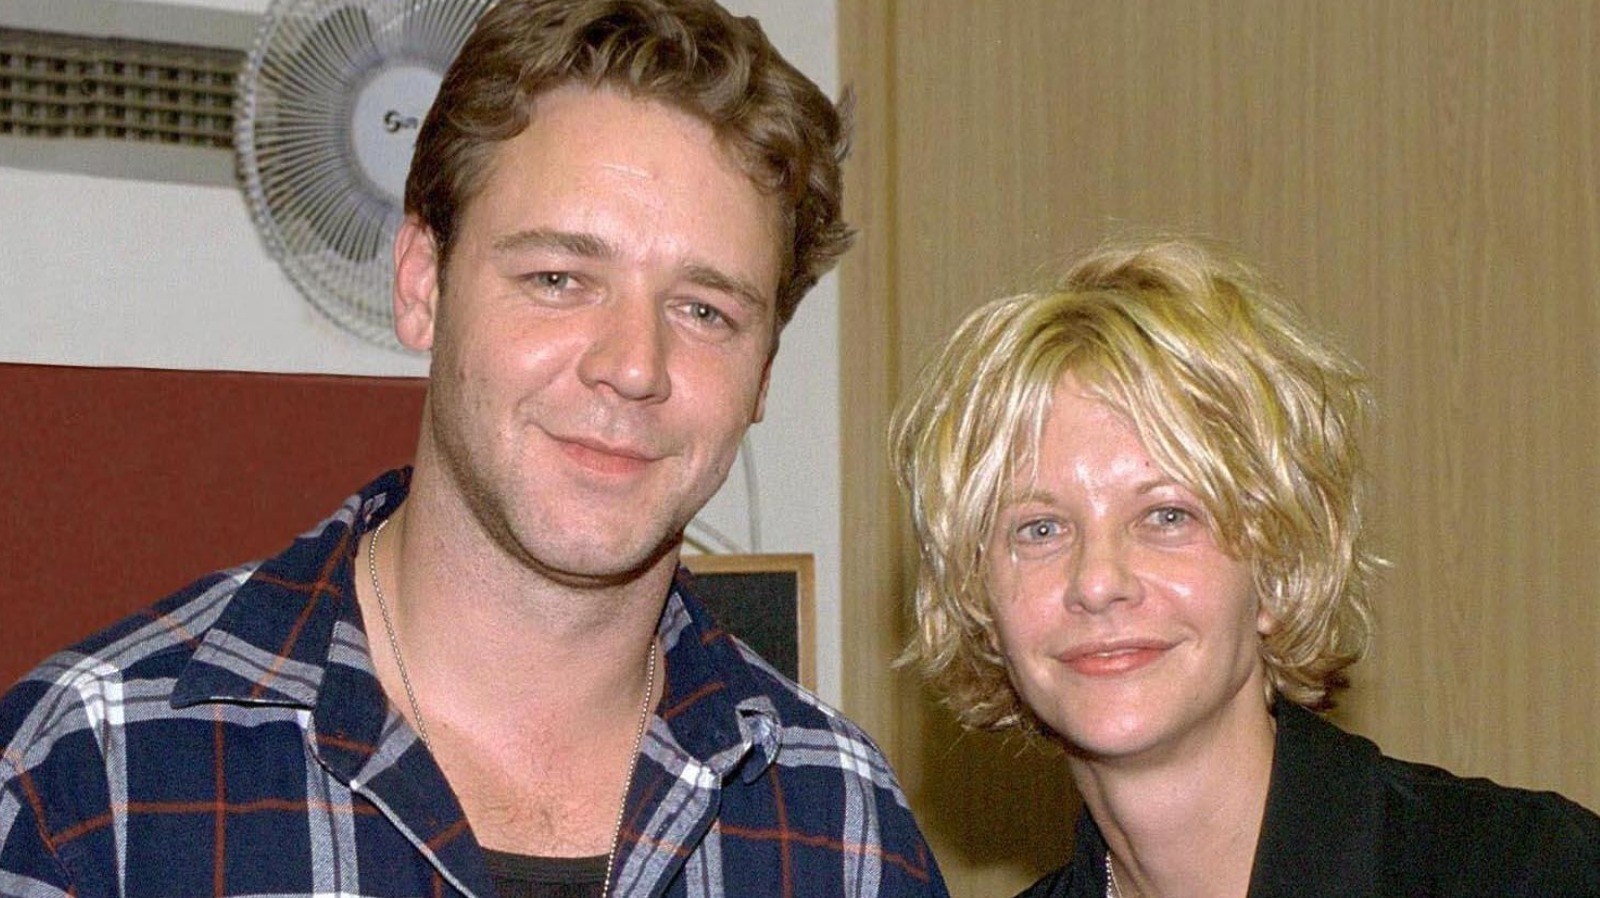 Meg Ryan and Russell Crowe